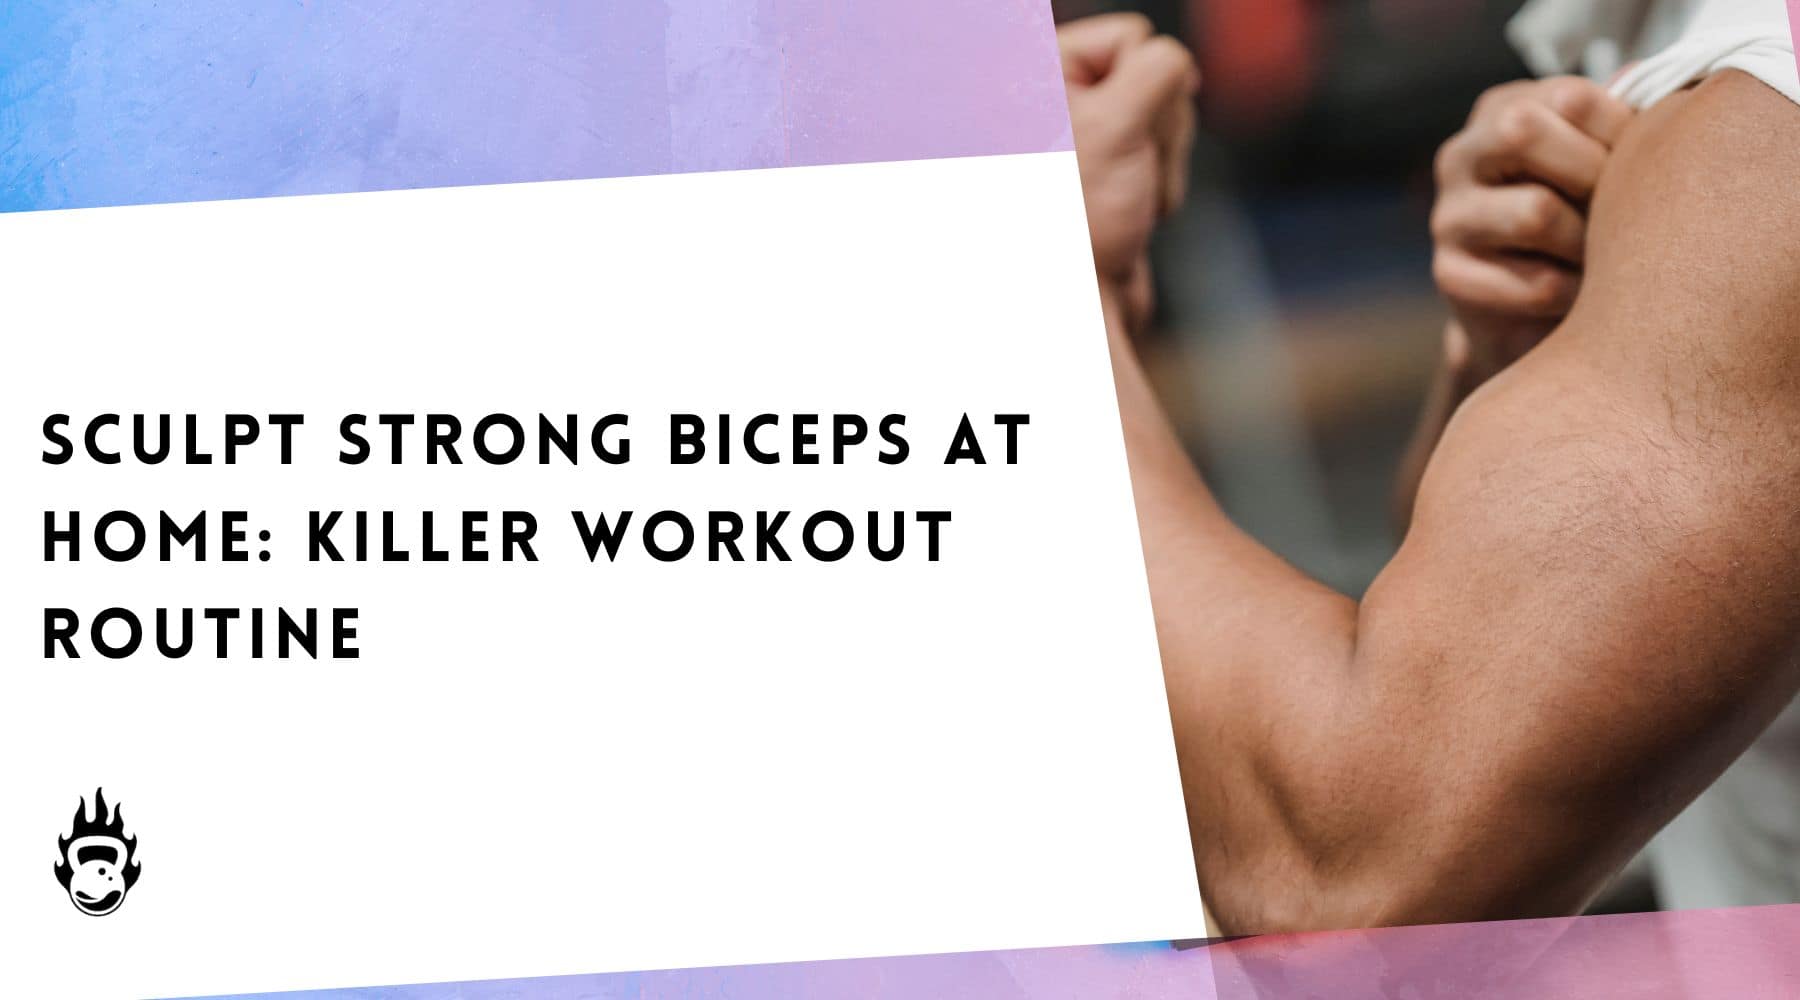 Sculpt Strong Biceps at Home: Killer Workout Routine